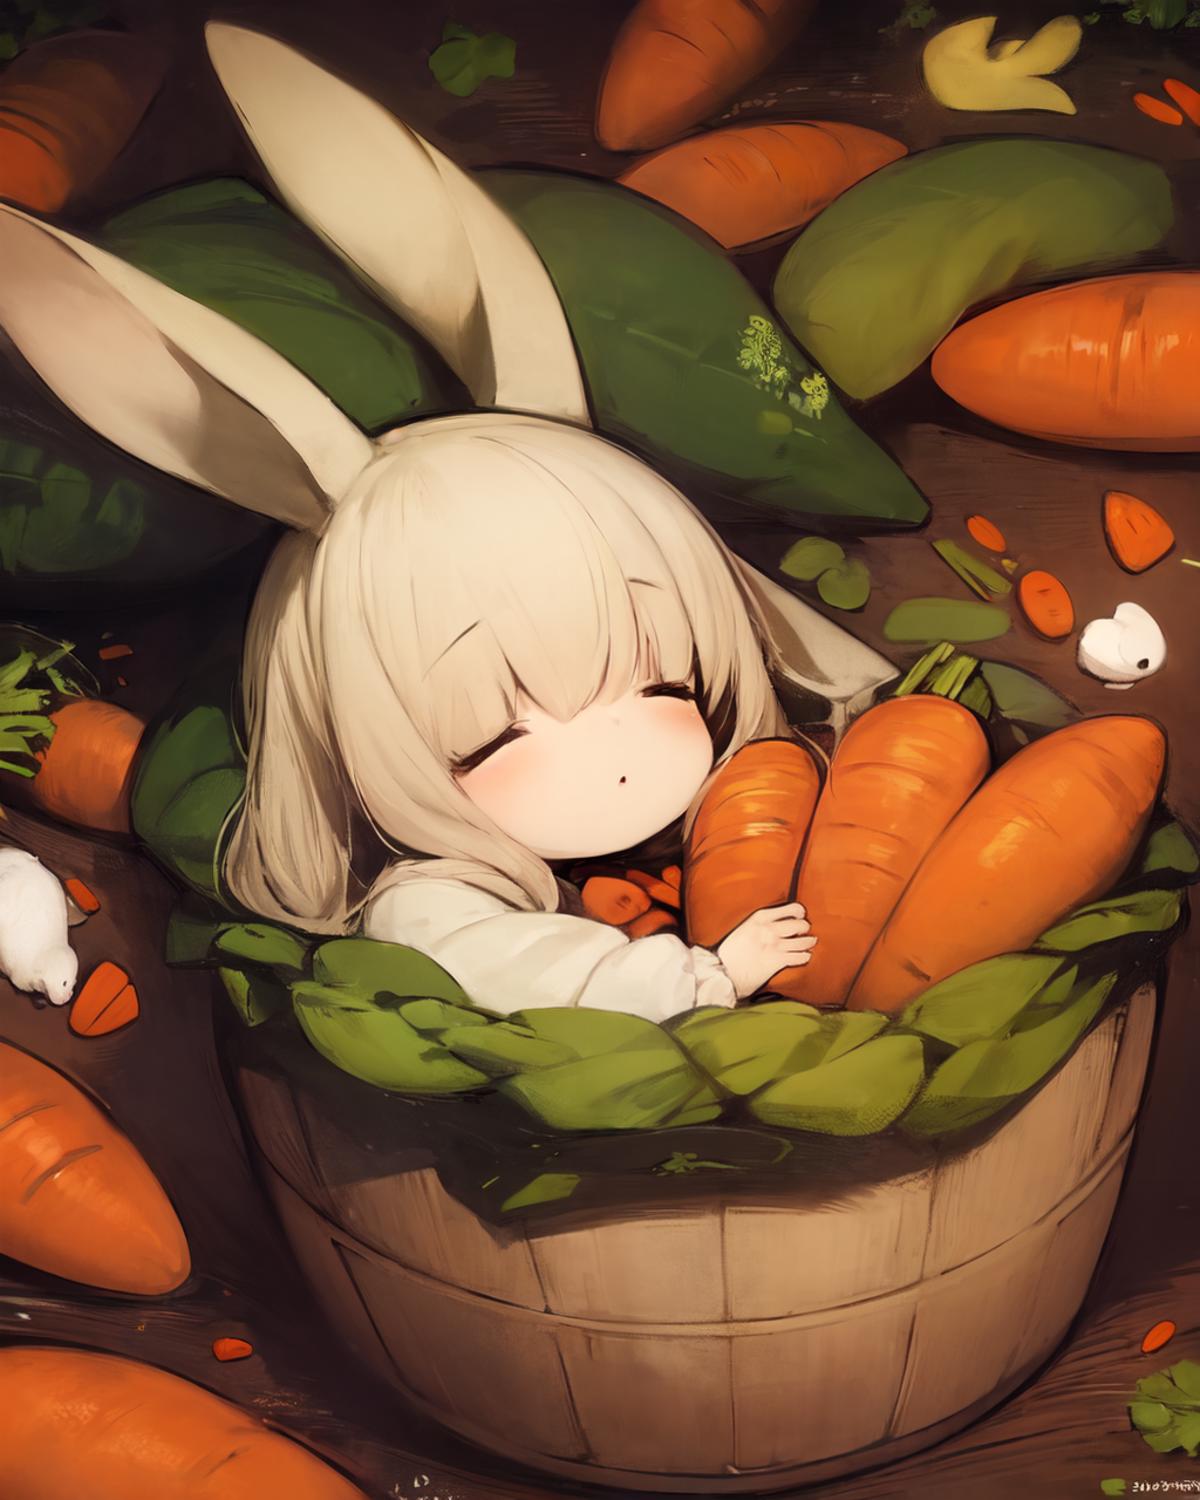 A cute illustration of a little girl laying in a basket full of carrots.